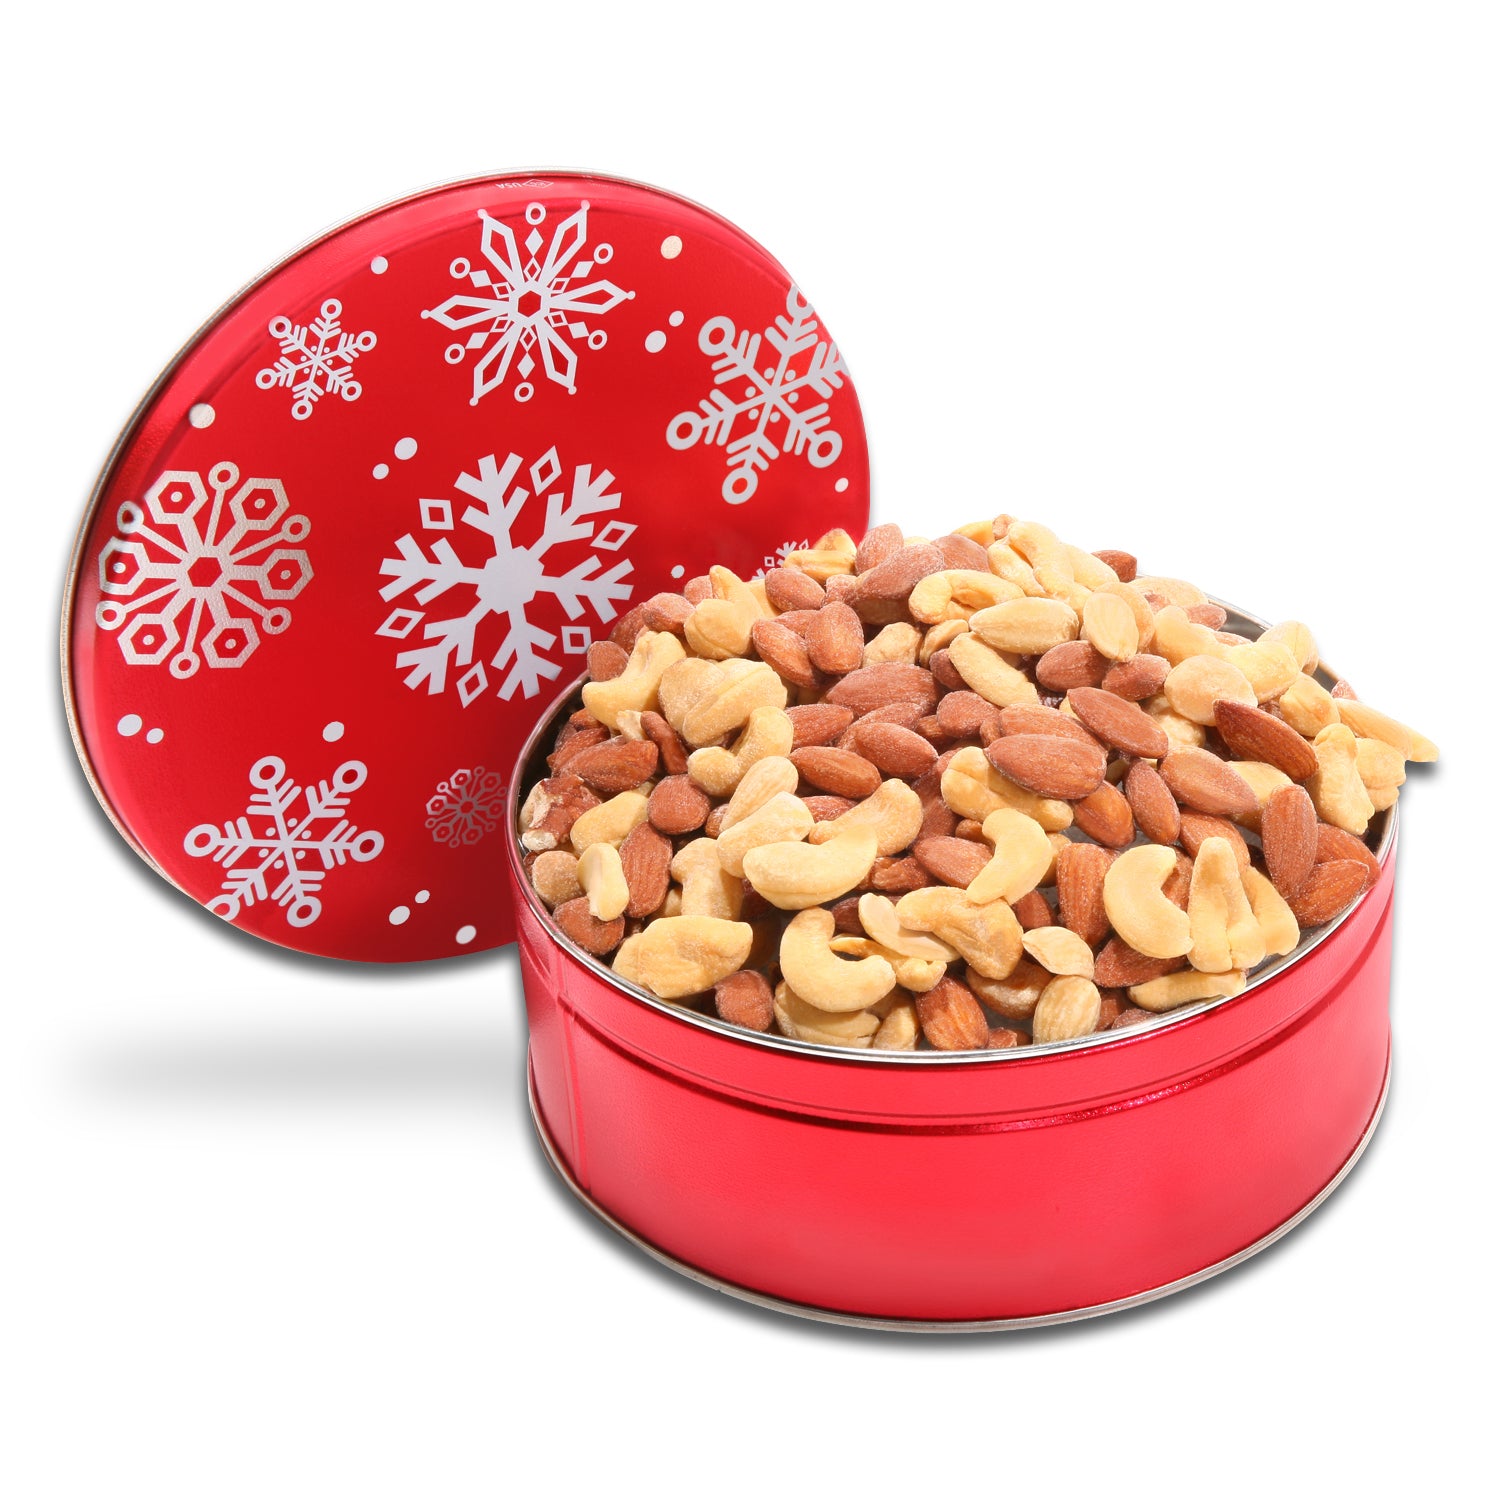 1lb deluxe mixed nuts in red tin with white snowflakes on lid